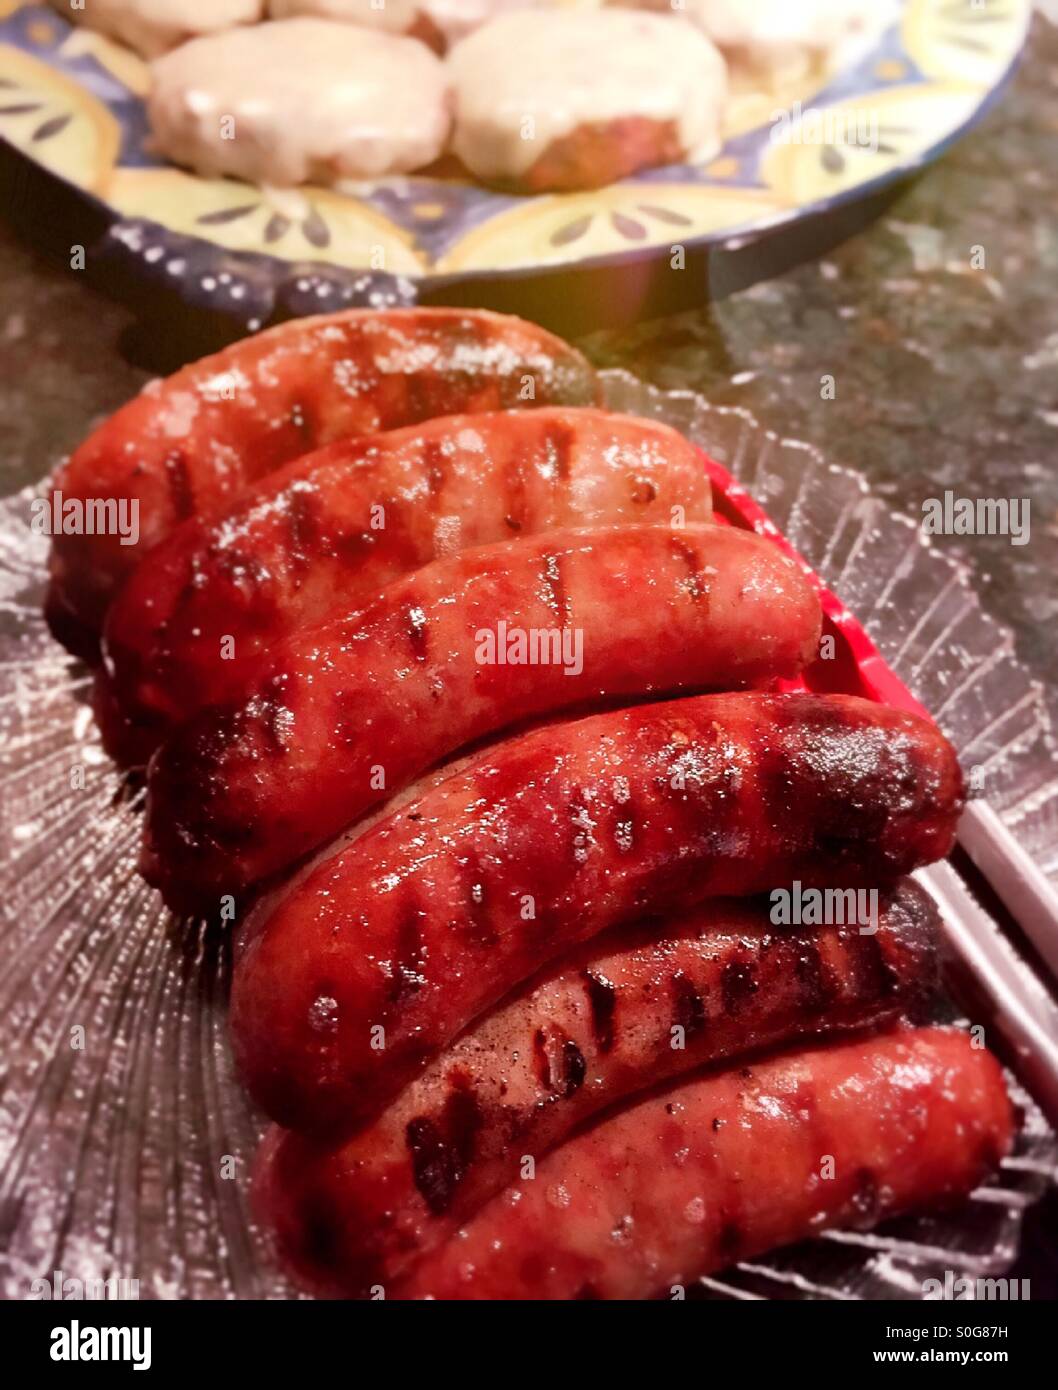 Bratwurst Sausages fresh off the grill, USA Stock Photo